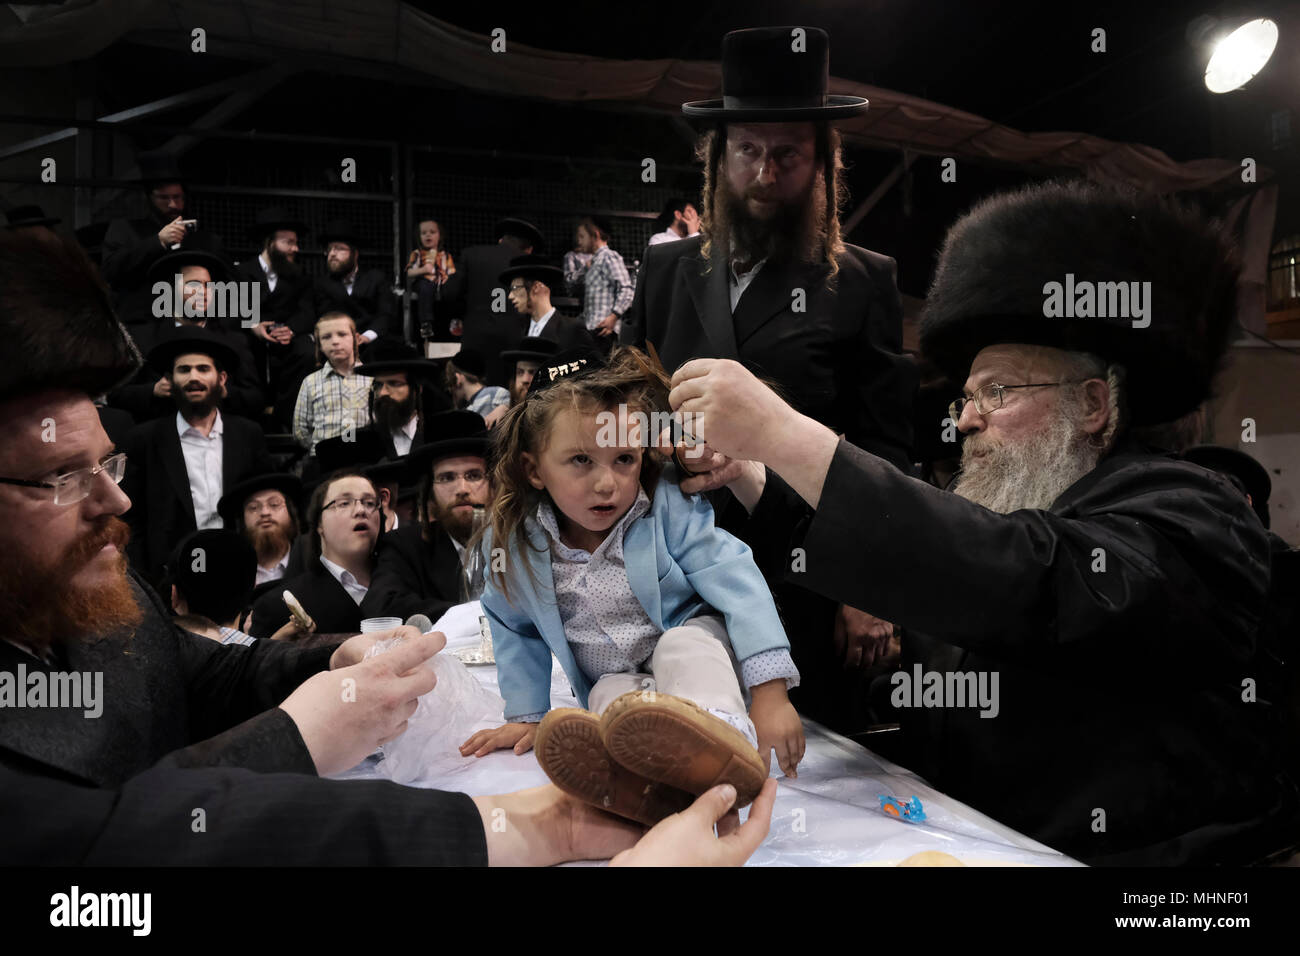 Jerusalem, Israel 02 May 2018. A three-year old Jewish boy takes part in the traditional Halake ceremony, a first hair cut from the Rabbi of the Pinsk-Karlin Hassidic dynasty in Geula religious neighborhood during the celebration of Lag BaOmer holiday which marks the celebration, interpreted by some as anniversary of death of Rabbi Shimon bar Yochai, one of Judaism's great sages some 1800 years ago and the day on which he revealed the deepest secrets of kabbalah a landmark text of Jewish mysticism Stock Photo